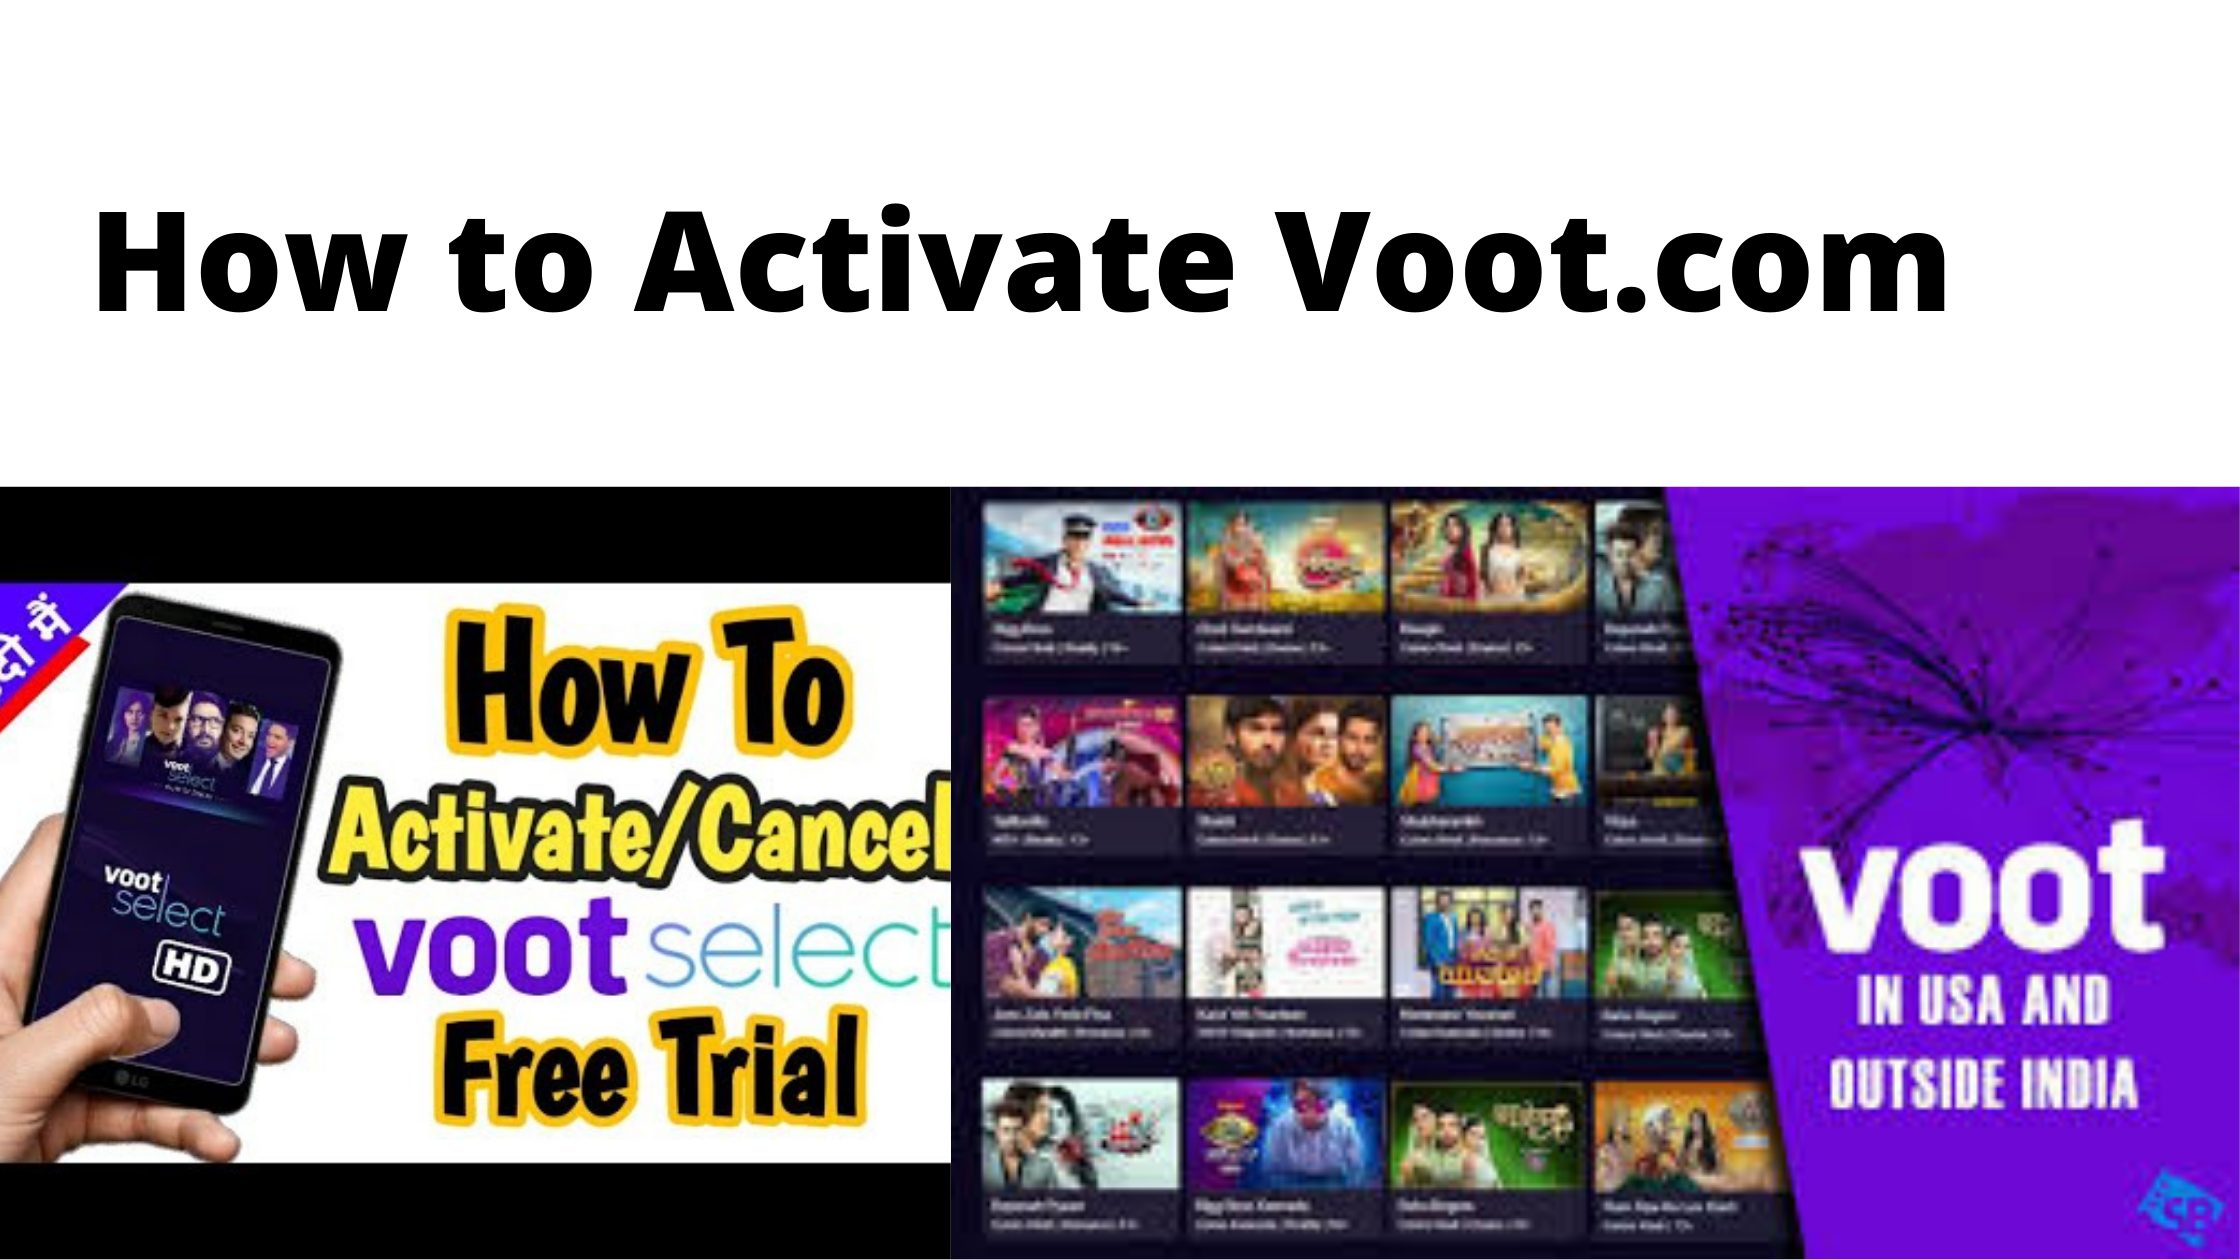 https //www.voot.com/activate code: Step by step Guides & Coupons